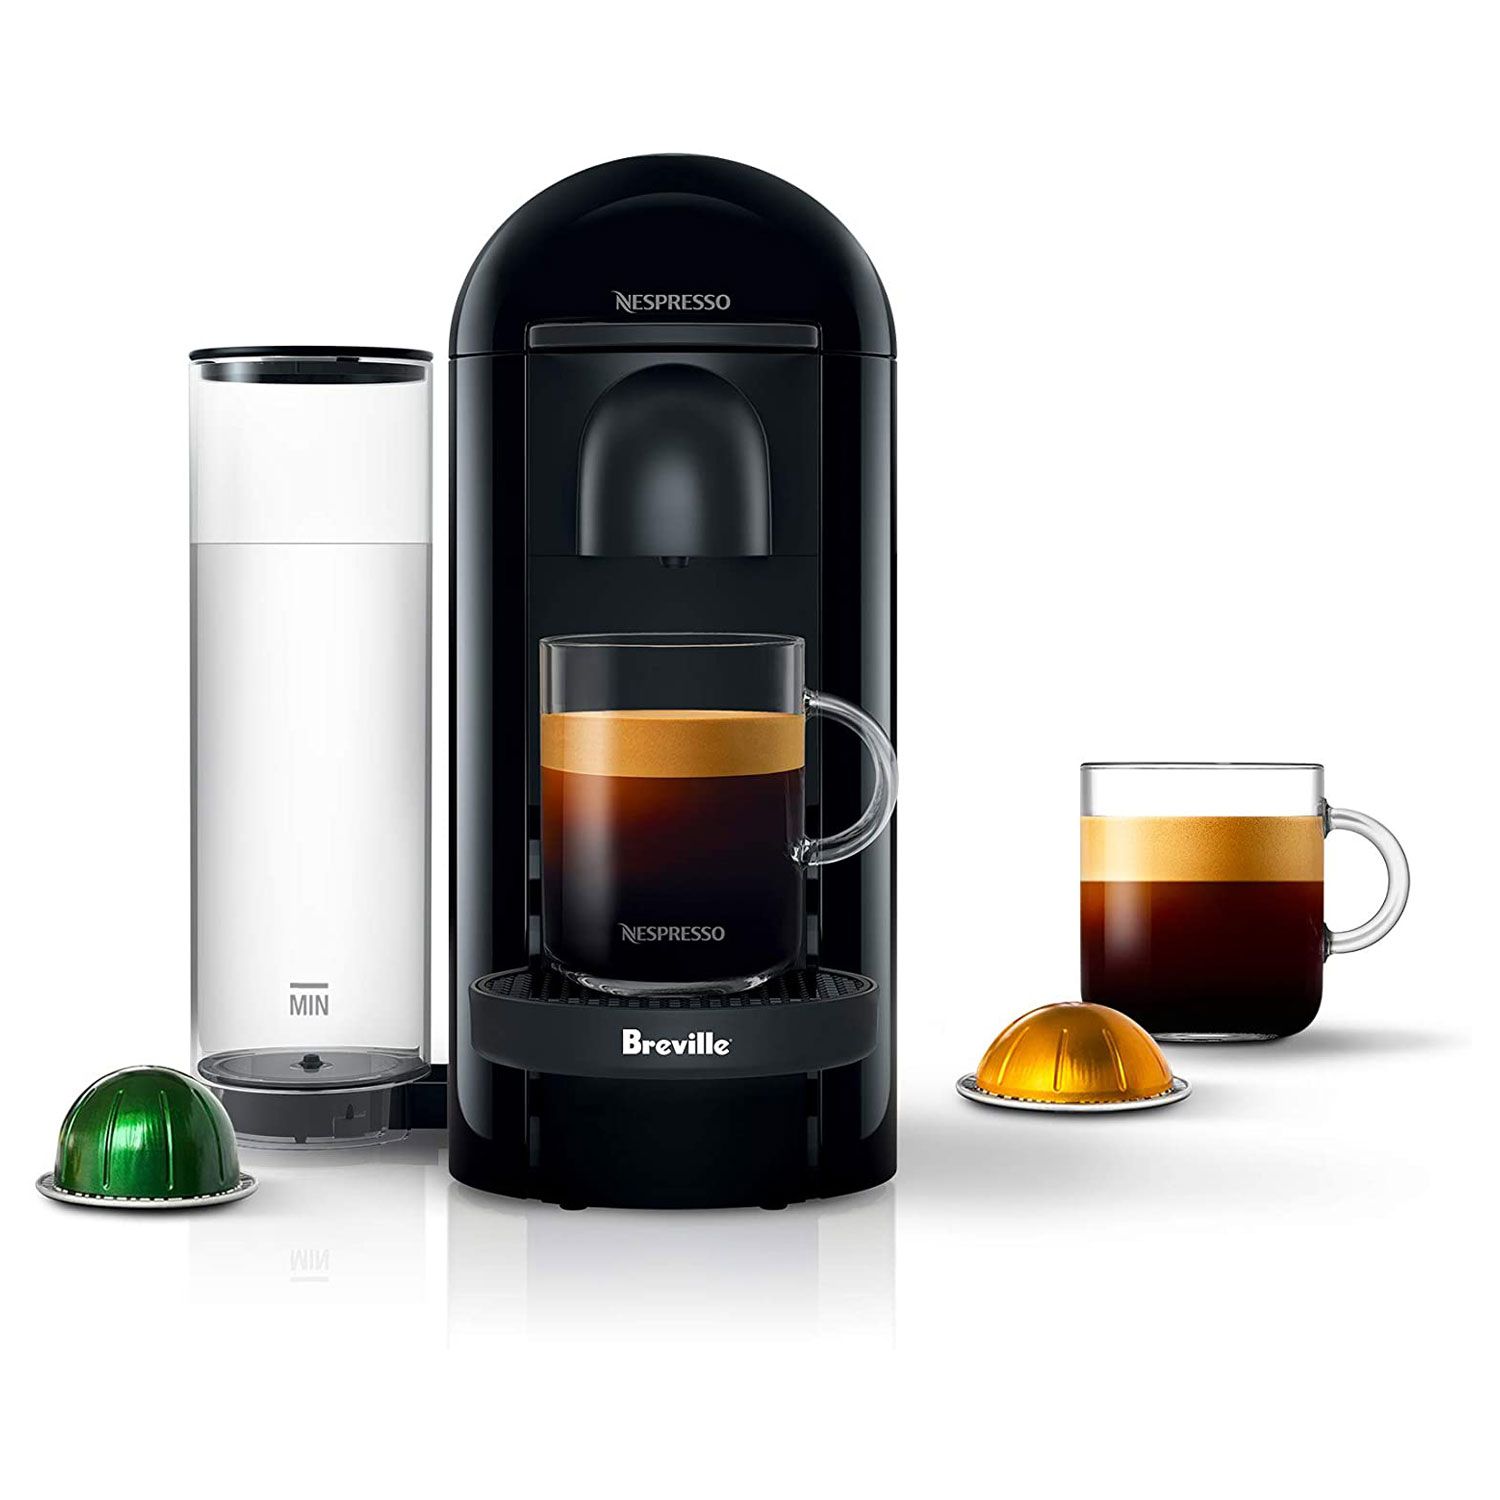 Intensief toegang Bacteriën Nespresso Machine Black Friday Deals at Amazon Start at $120 | PEOPLE.com